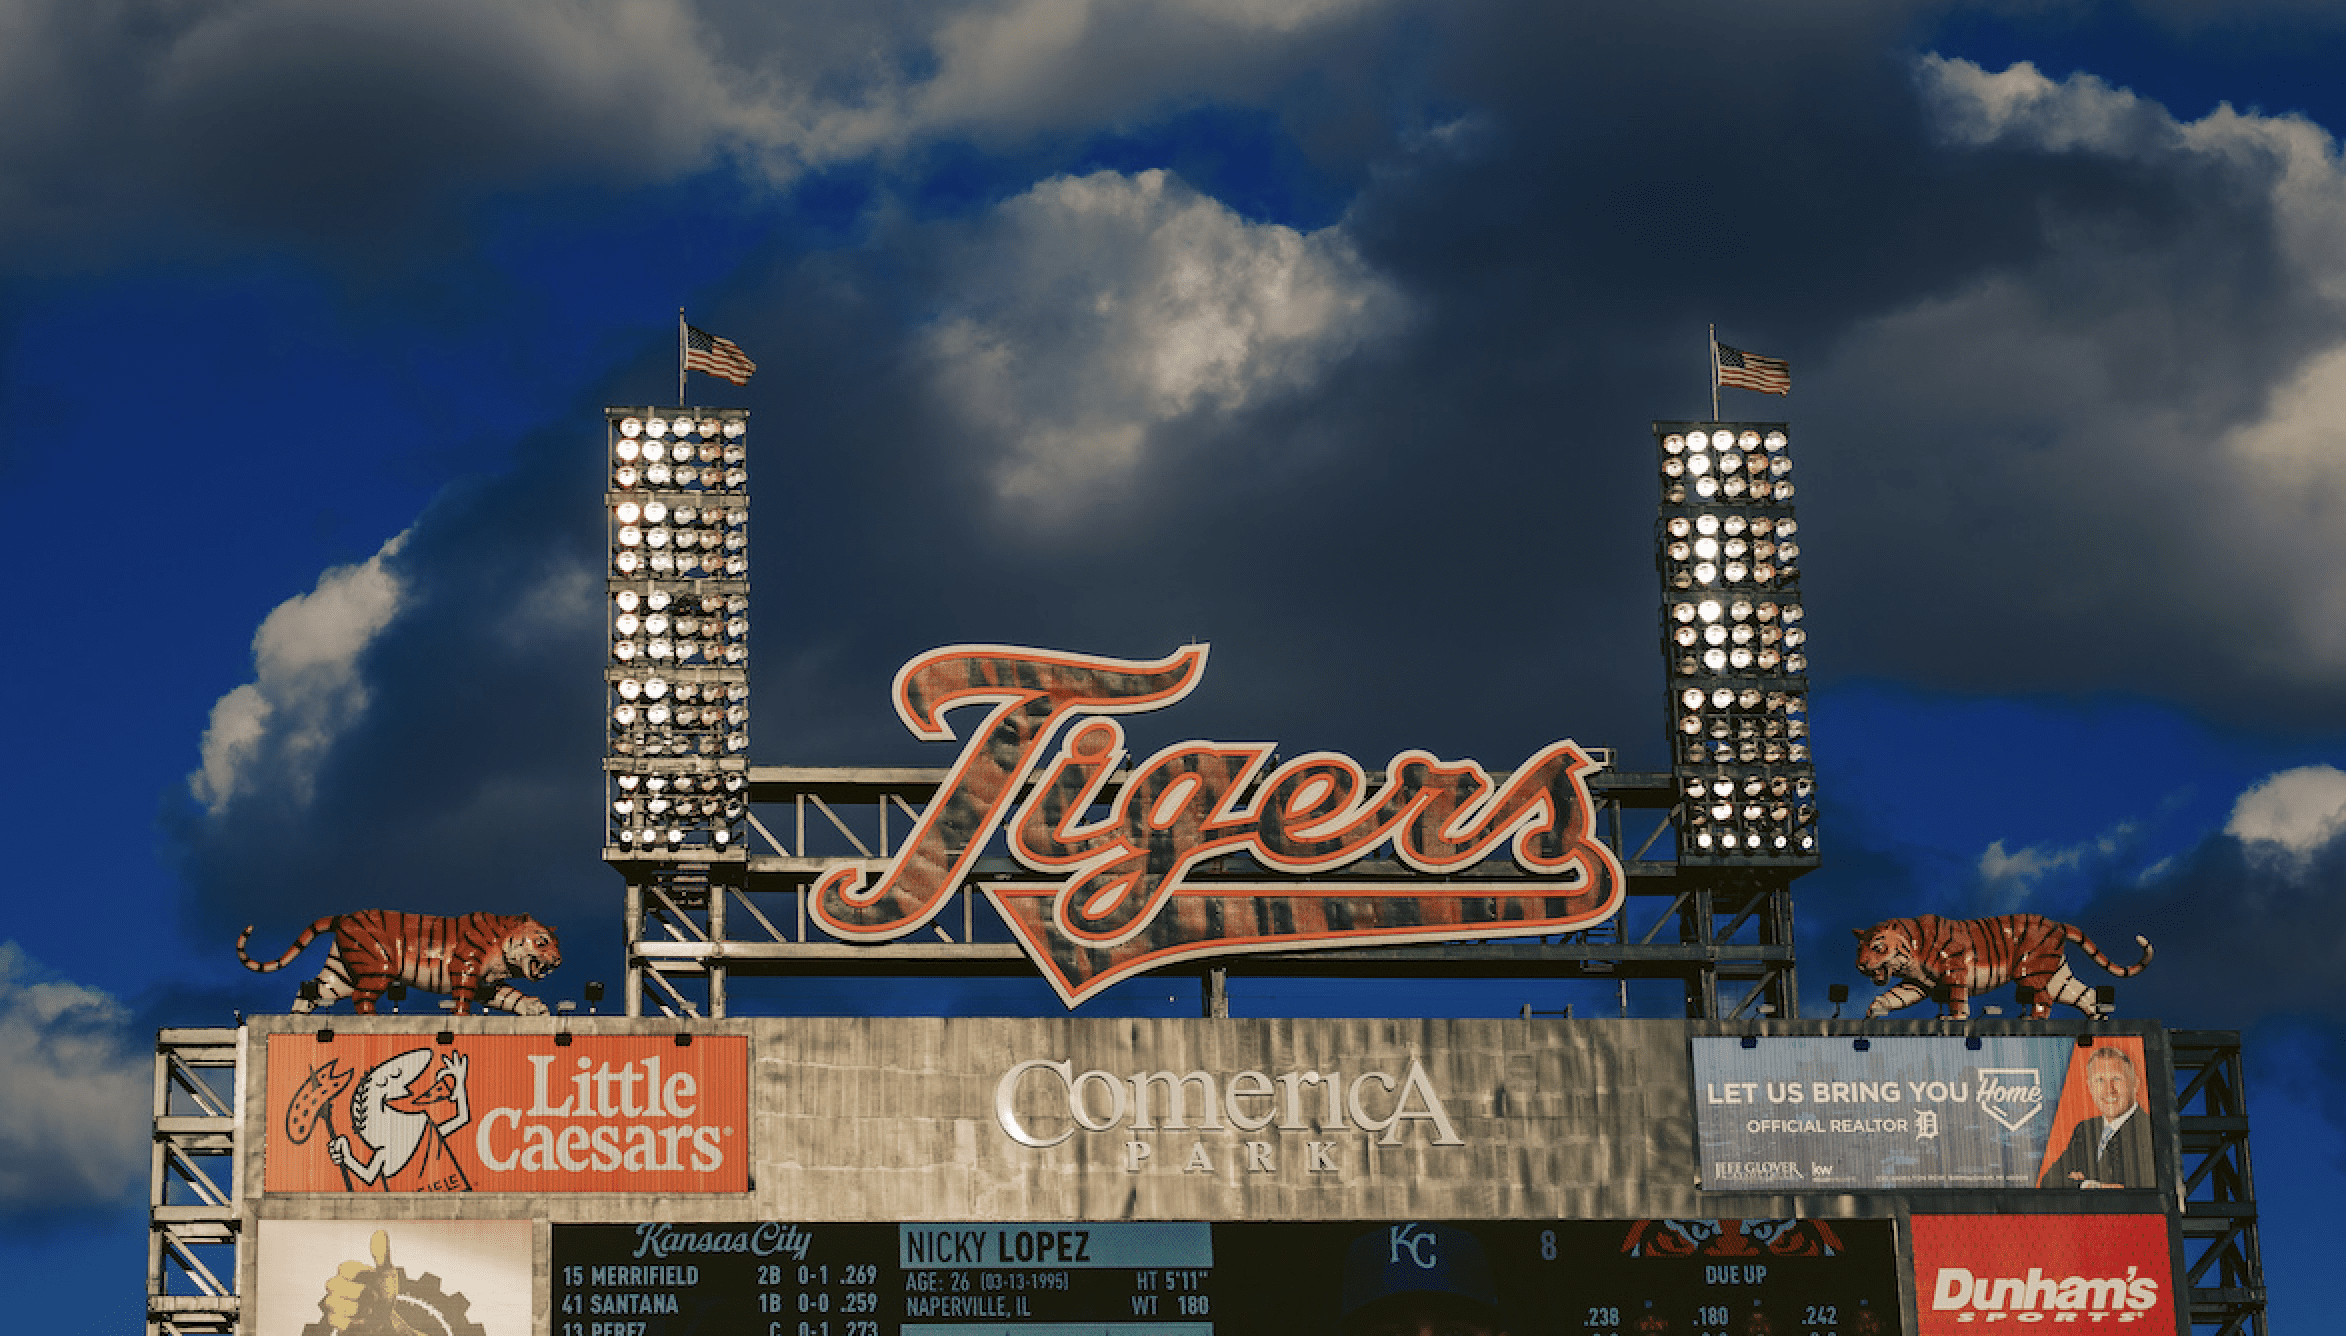 Tigers Greats Hold Honorary Place in the Hearts of Detroiters and at Comerica  Park - Ilitch Companies News Hub